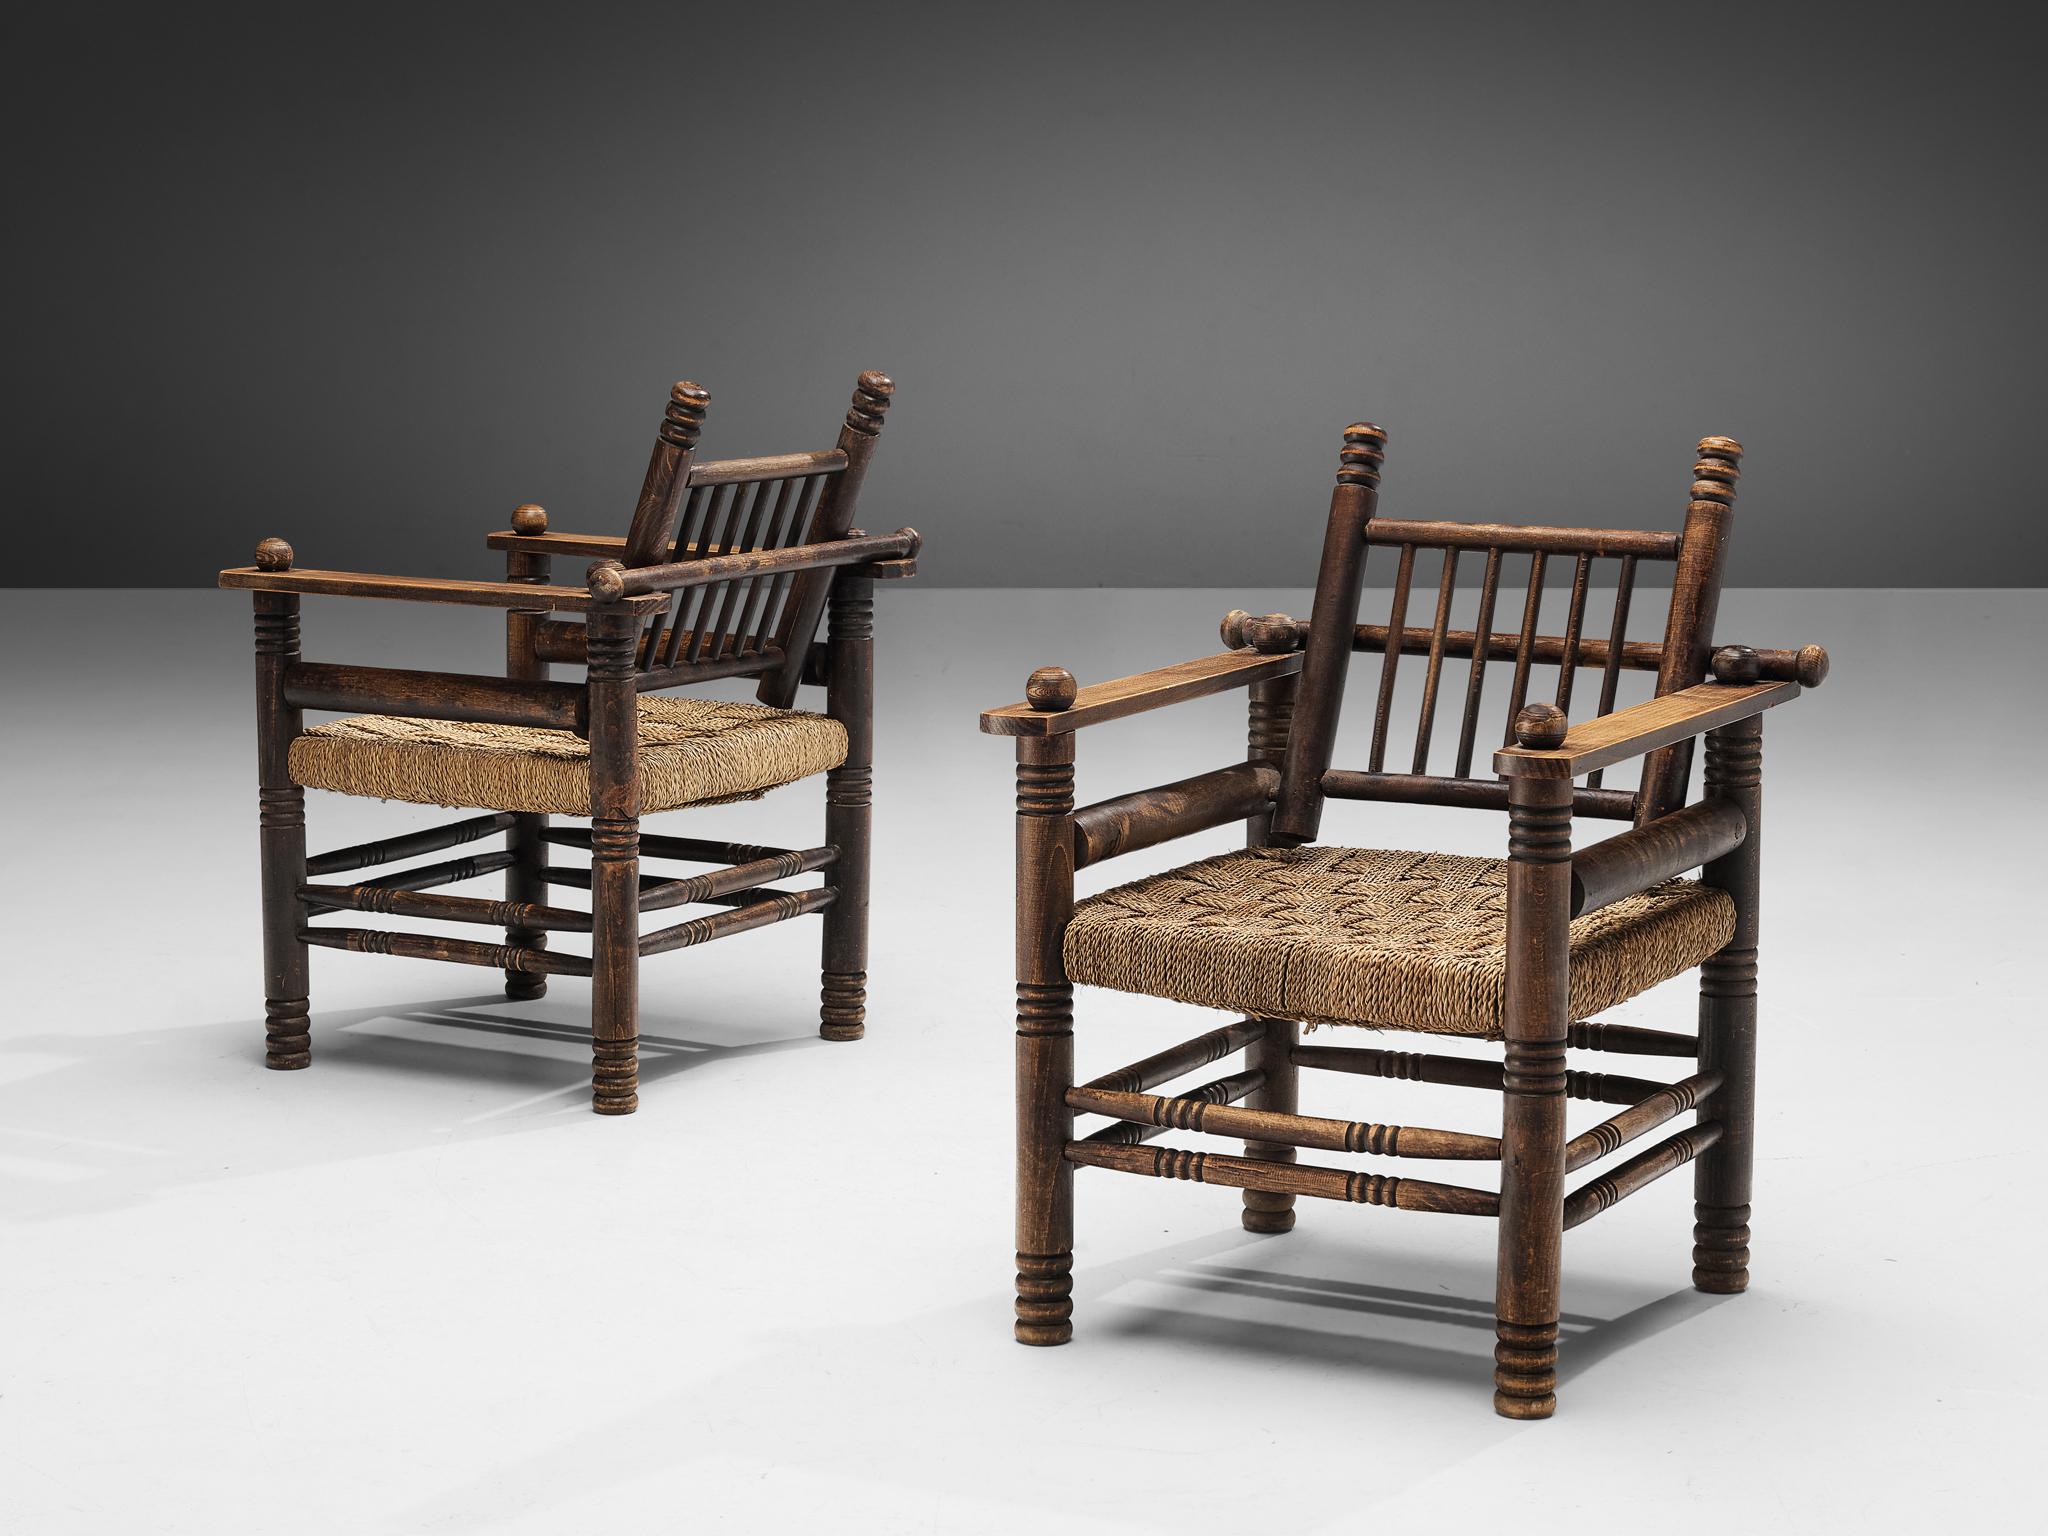 Charles Dudouyt, pair of lounge chairs, poplar, ash, beech, rush, France, 1940s.

Decorative lounge chairs designed by Charles Dudouyt. The frame has multiple carved details that add up to a complex whole. Carved lines and circular ends, straight